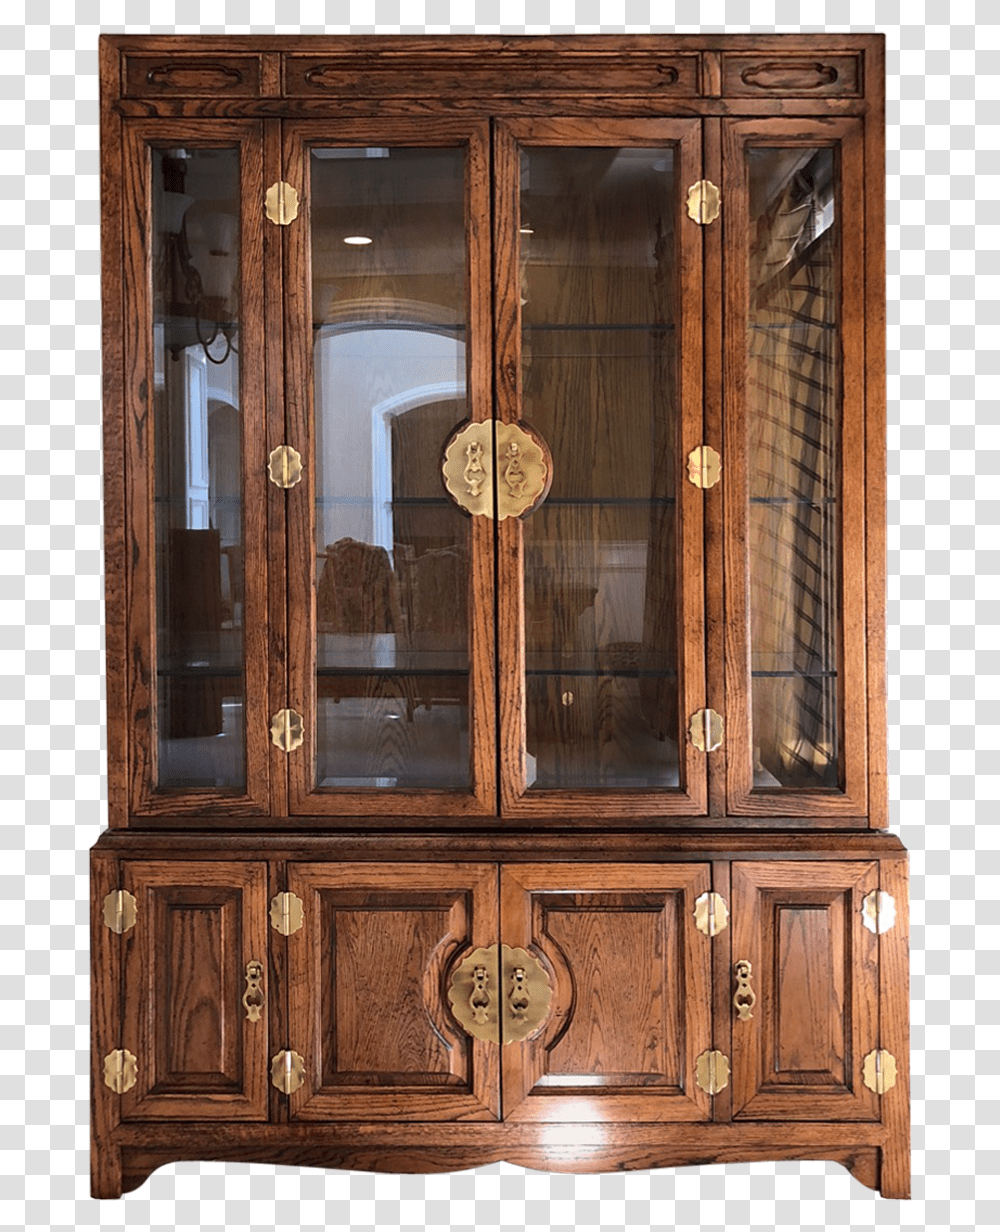 China Cabinet Image China Cabinet, Furniture, Clock Tower, Architecture, Building Transparent Png